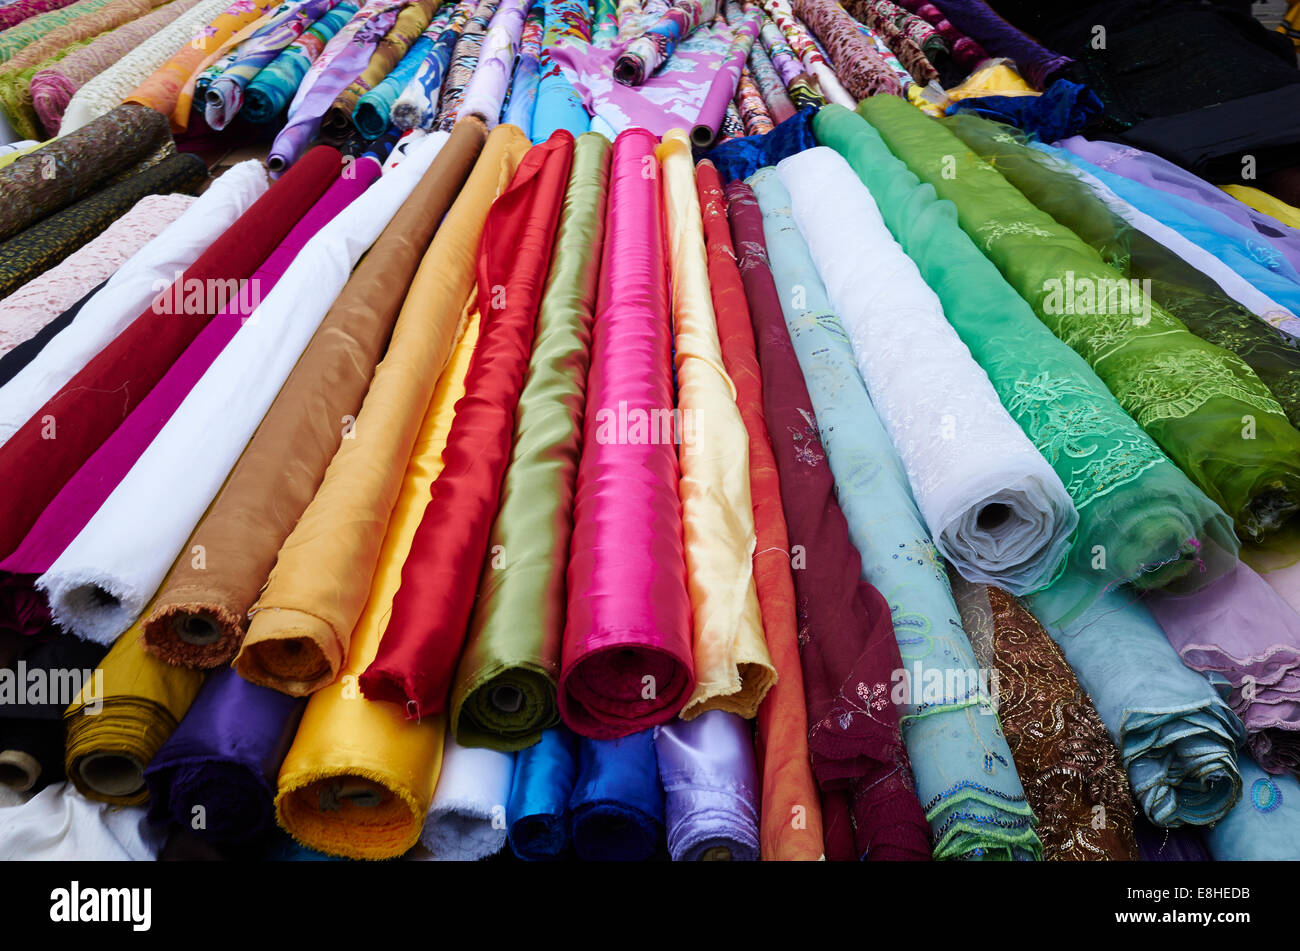 Rolls of fabric for sale in East Street Market, London, UK Stock Photo